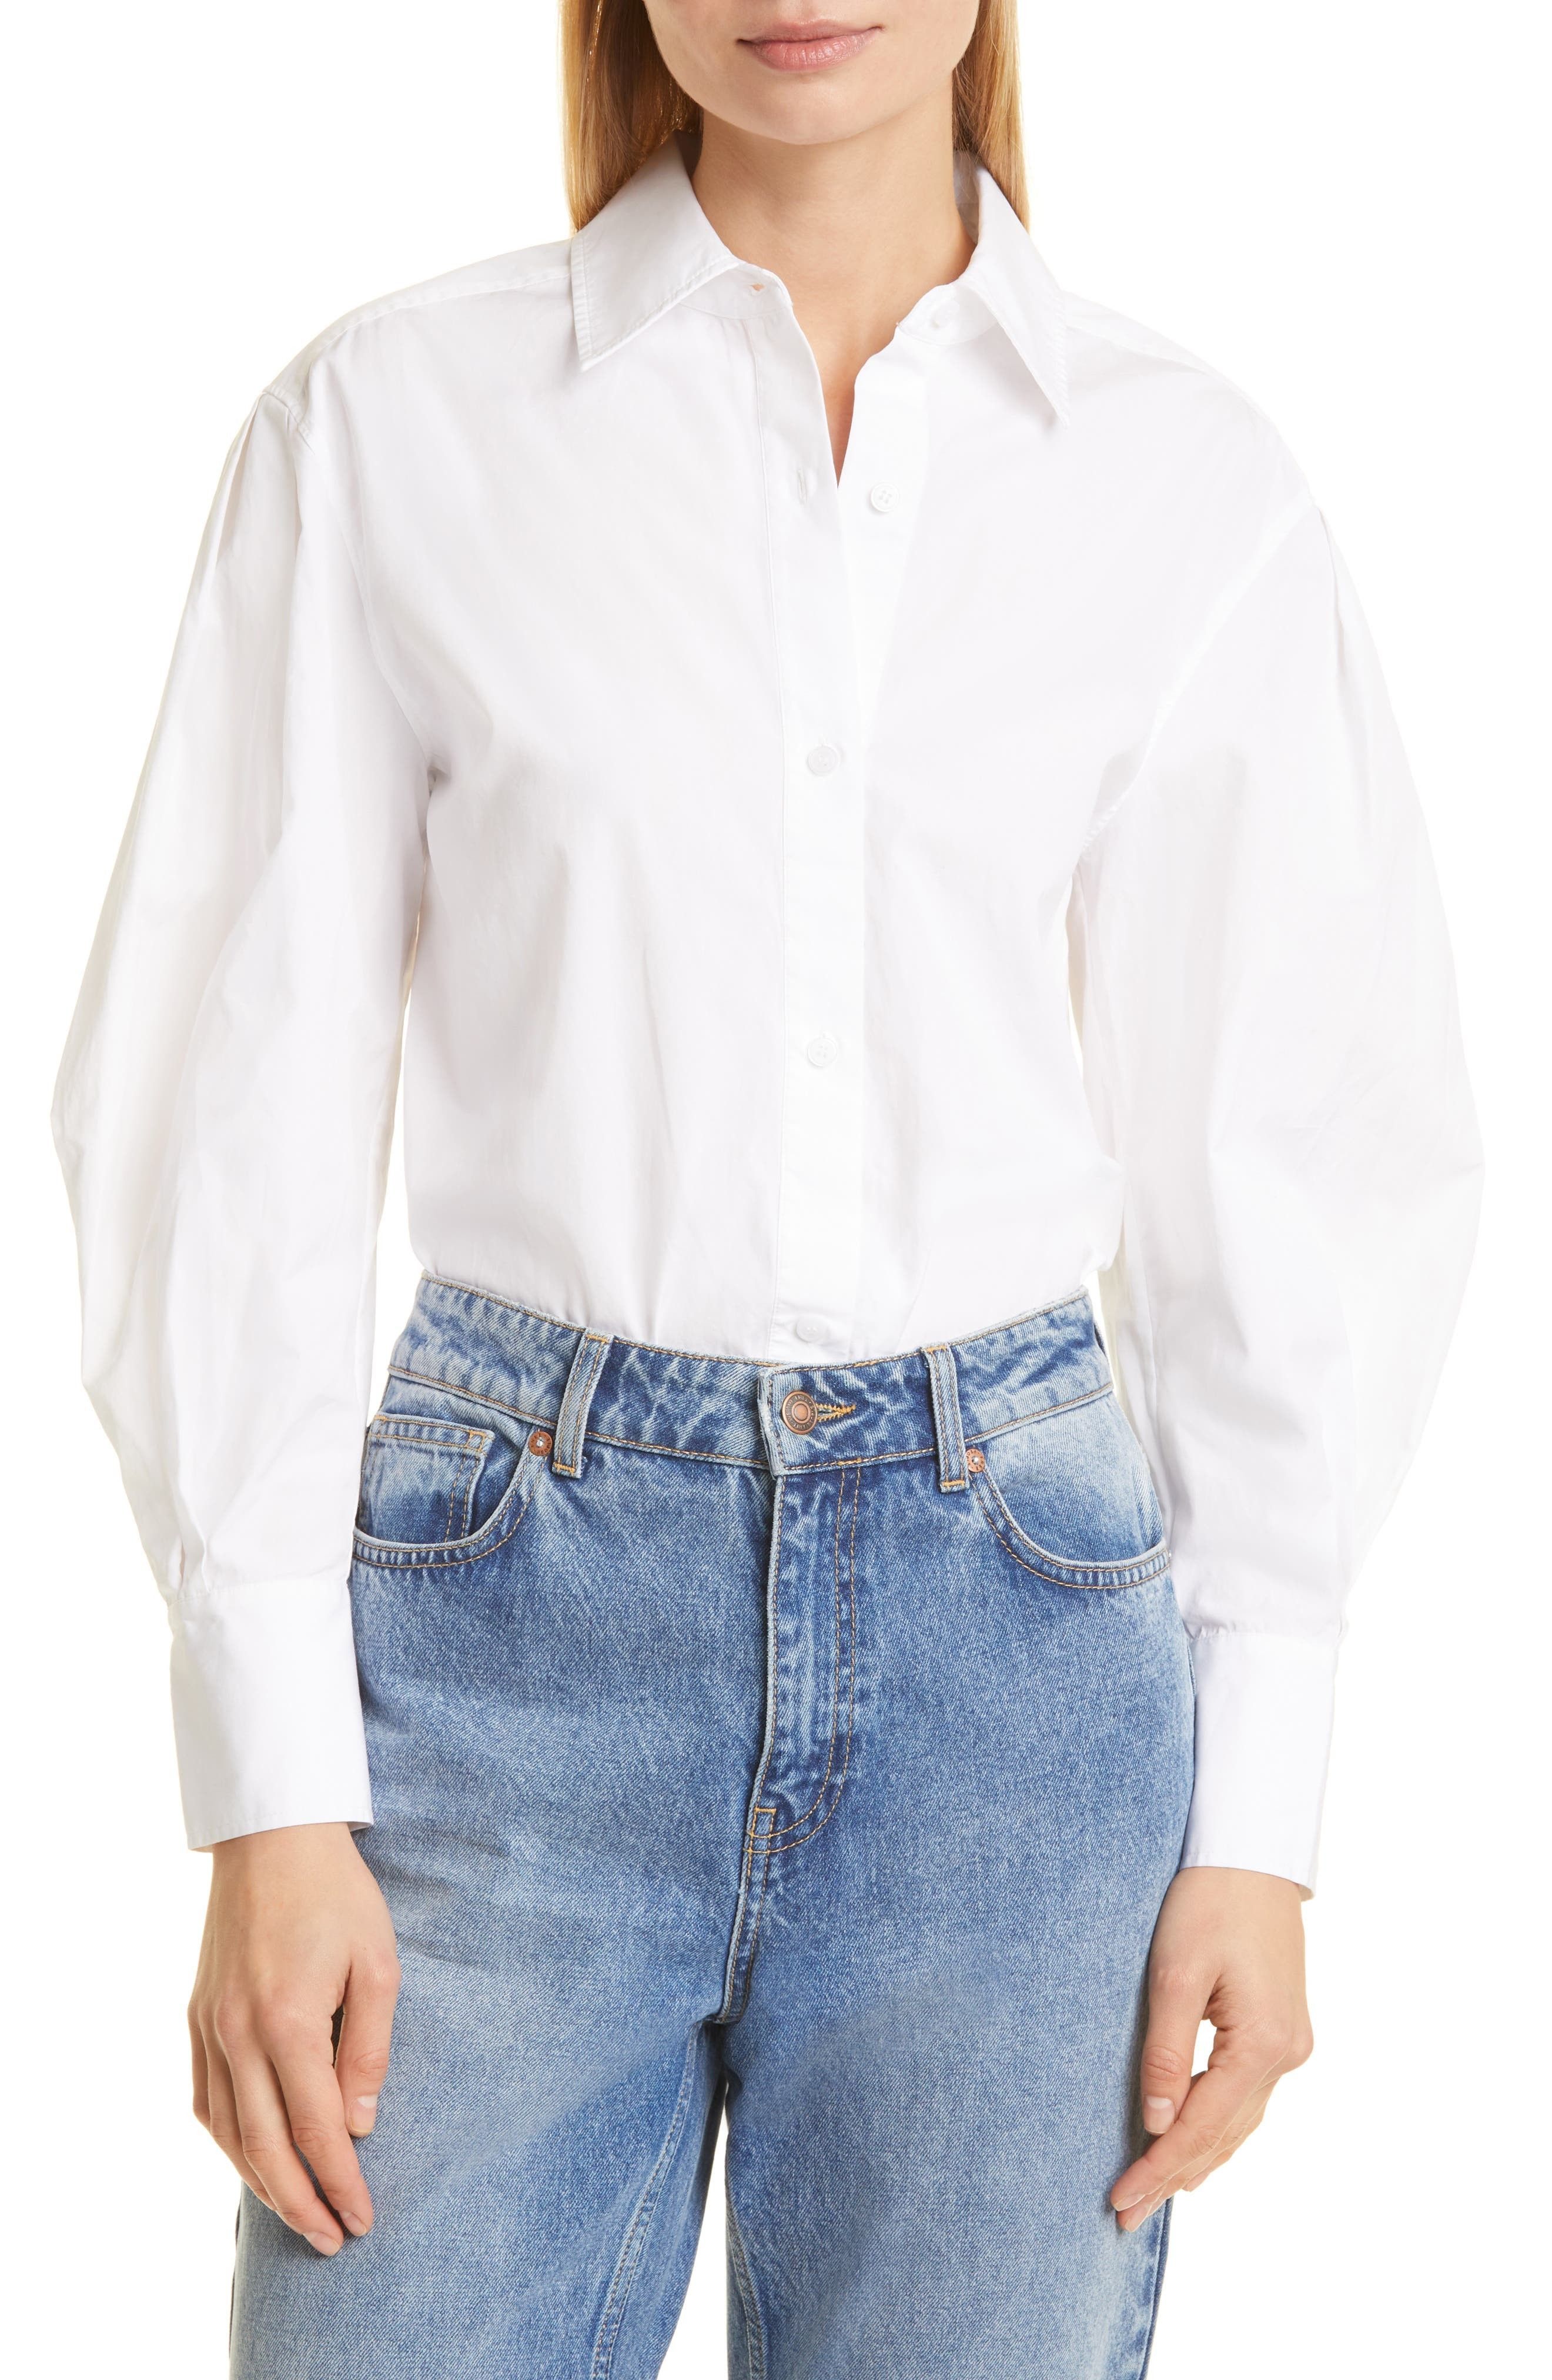 Nordstrom Signature Oversize Long Sleeve Cotton Blouse in White at Nordstrom, Size Small | Nordstrom